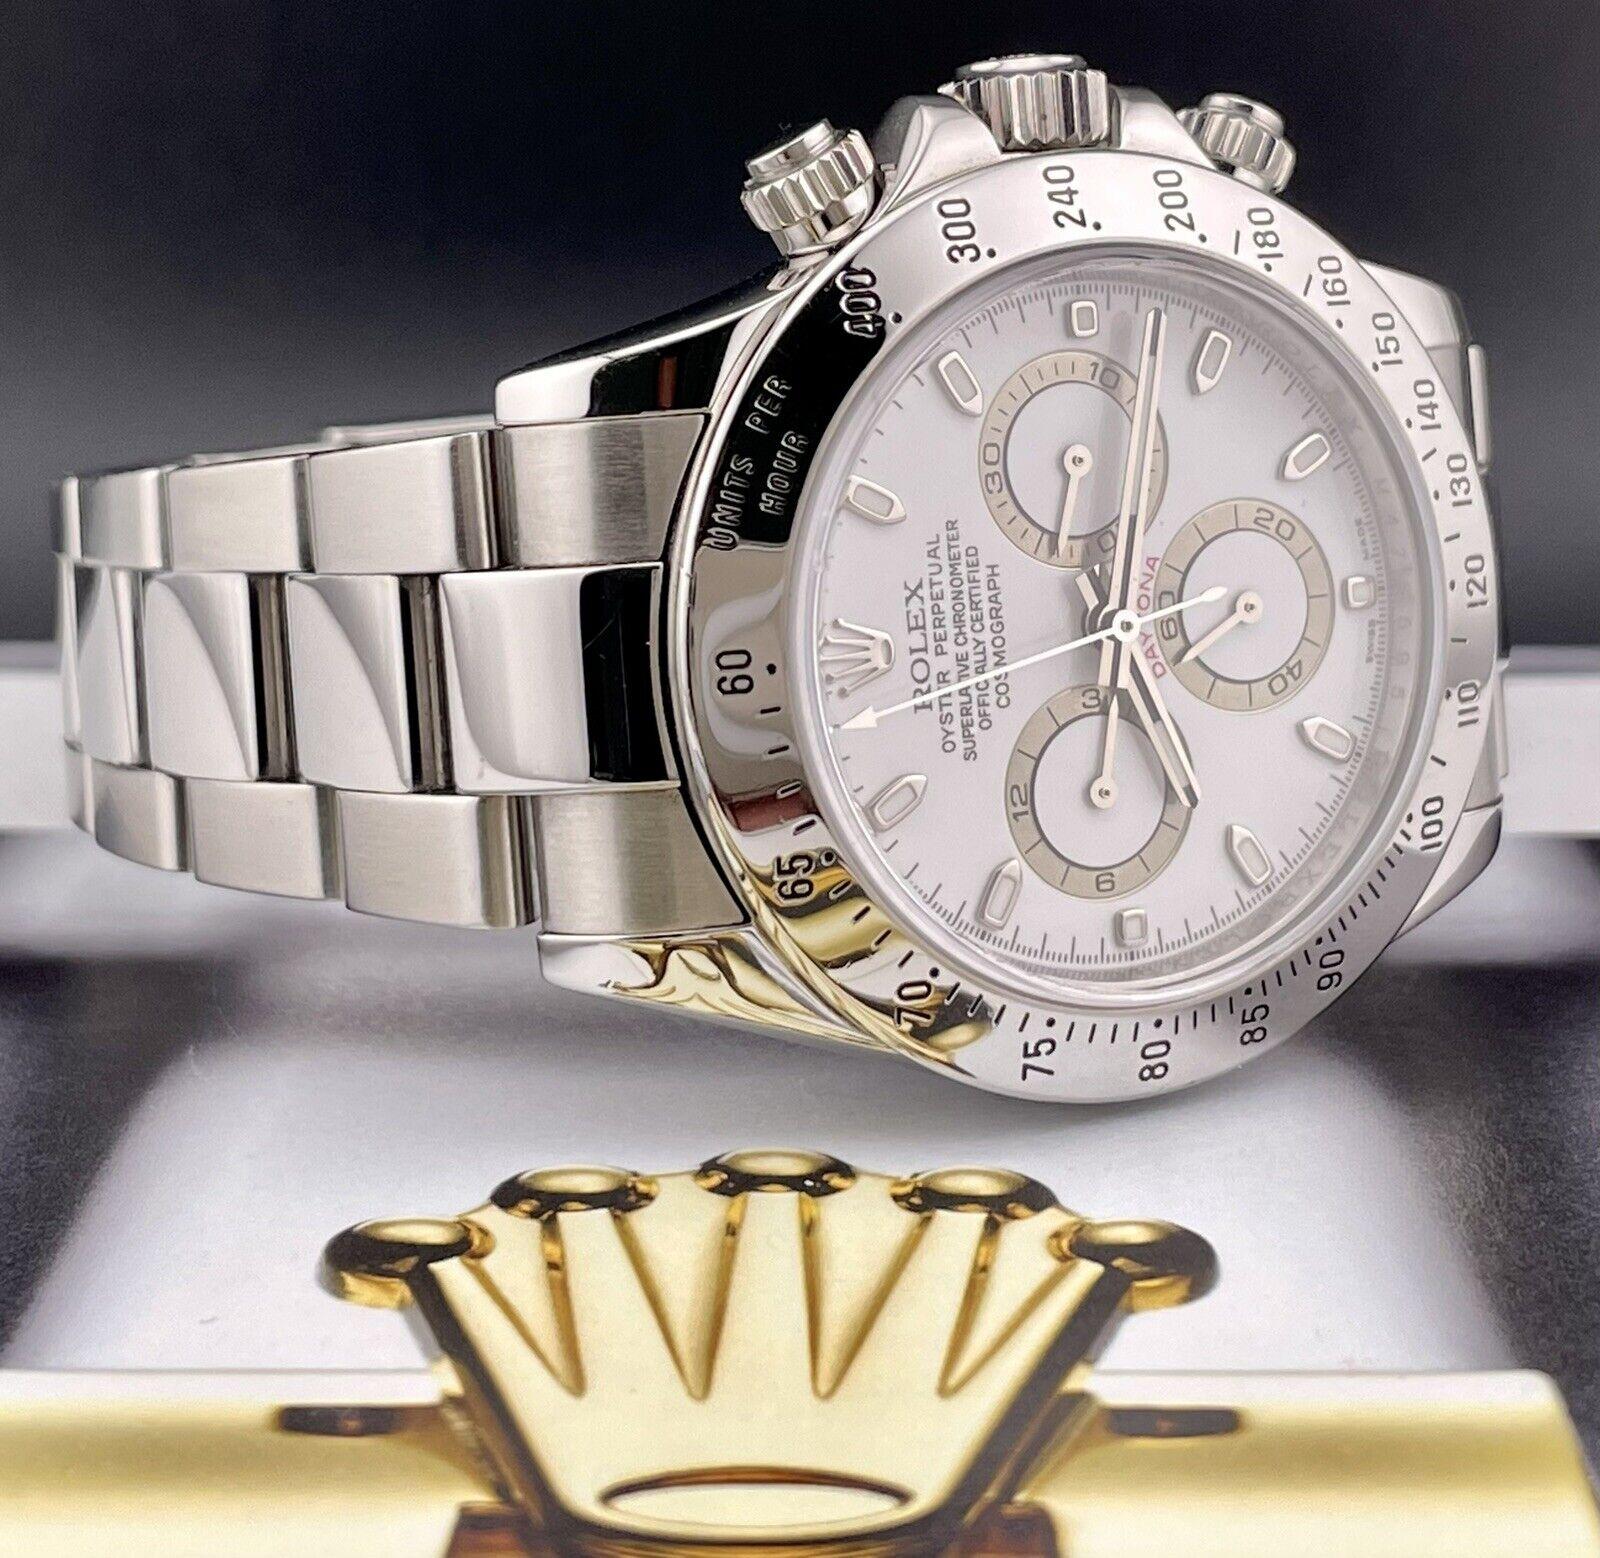 Rolex Daytona 40mm Watch. A Pre-owned watch w/ Original Box and 2008 Card. Watch is 100% Authentic and Comes with Authenticity Card. Watch Reference is 116520 and is in Excellent Condition (See Pictures). The dial color is White and material is